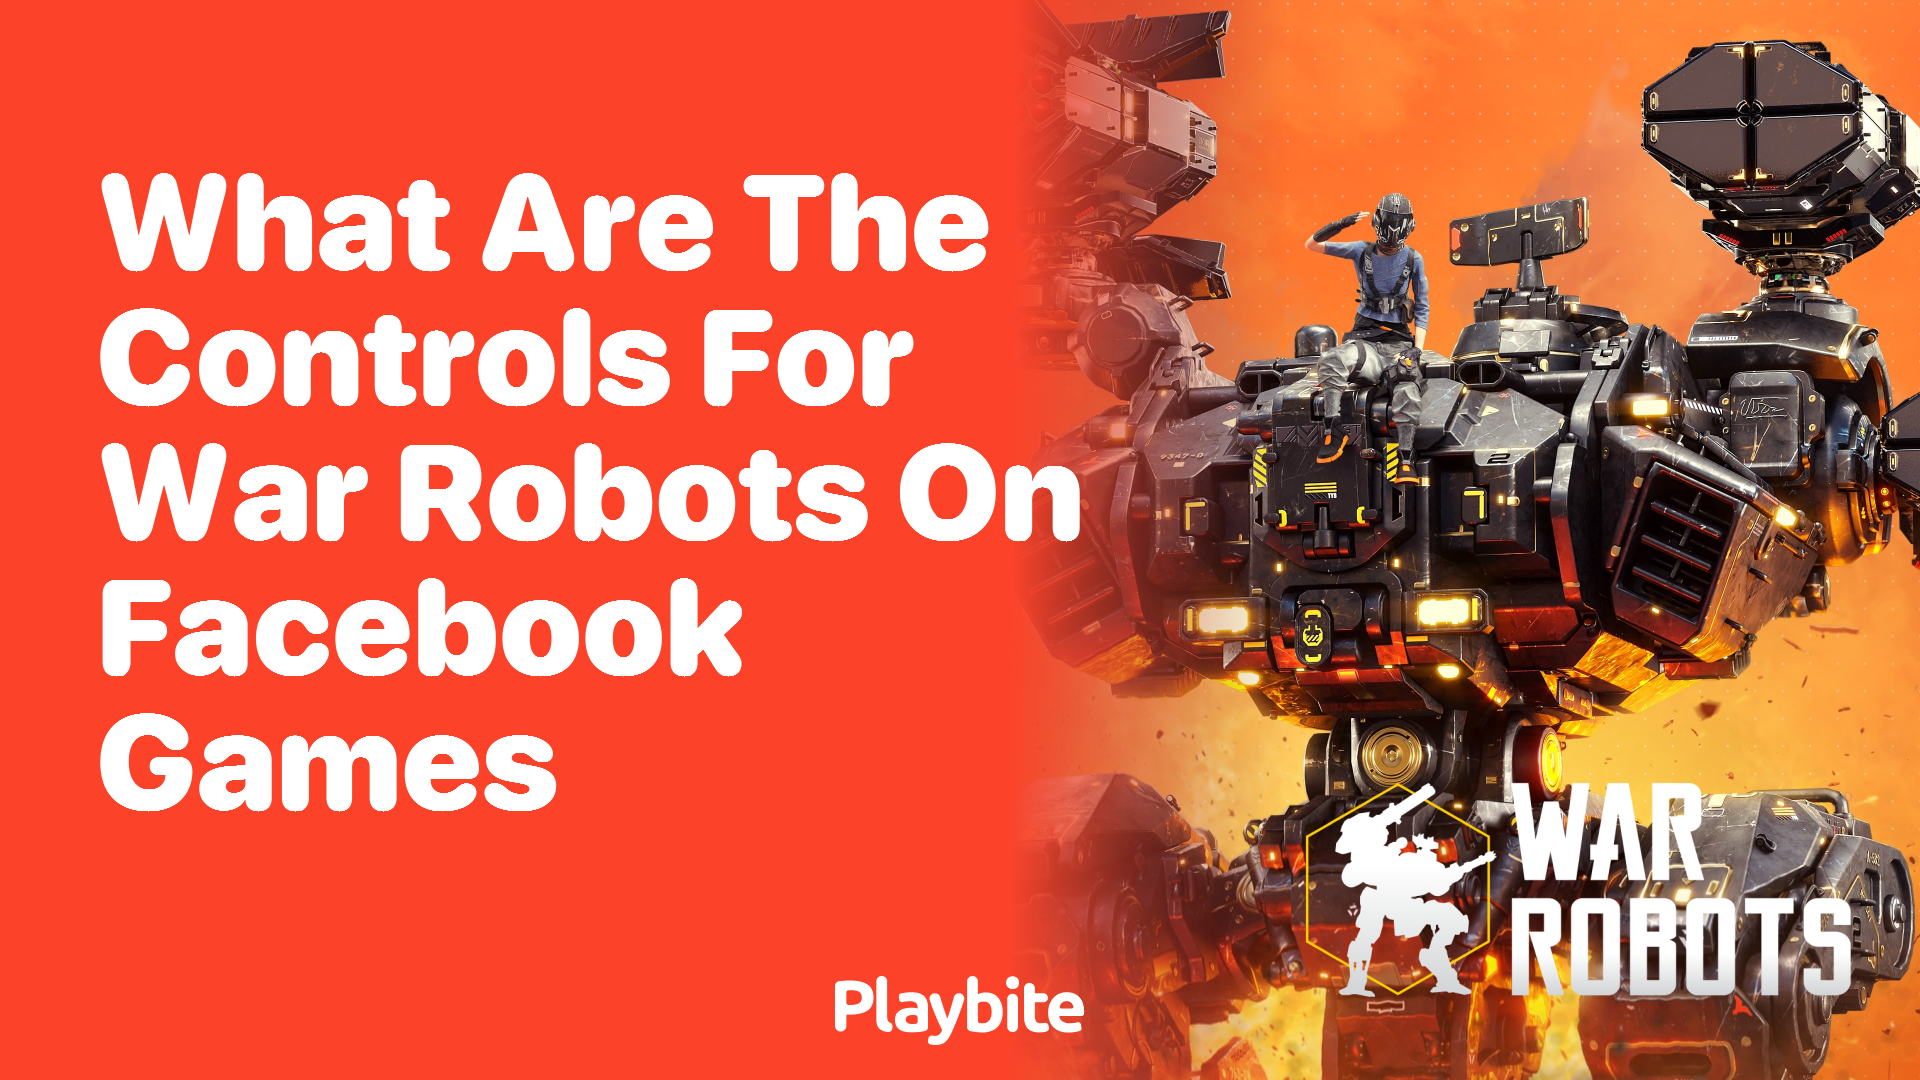 What Are the Controls for War Robots on Facebook Games?